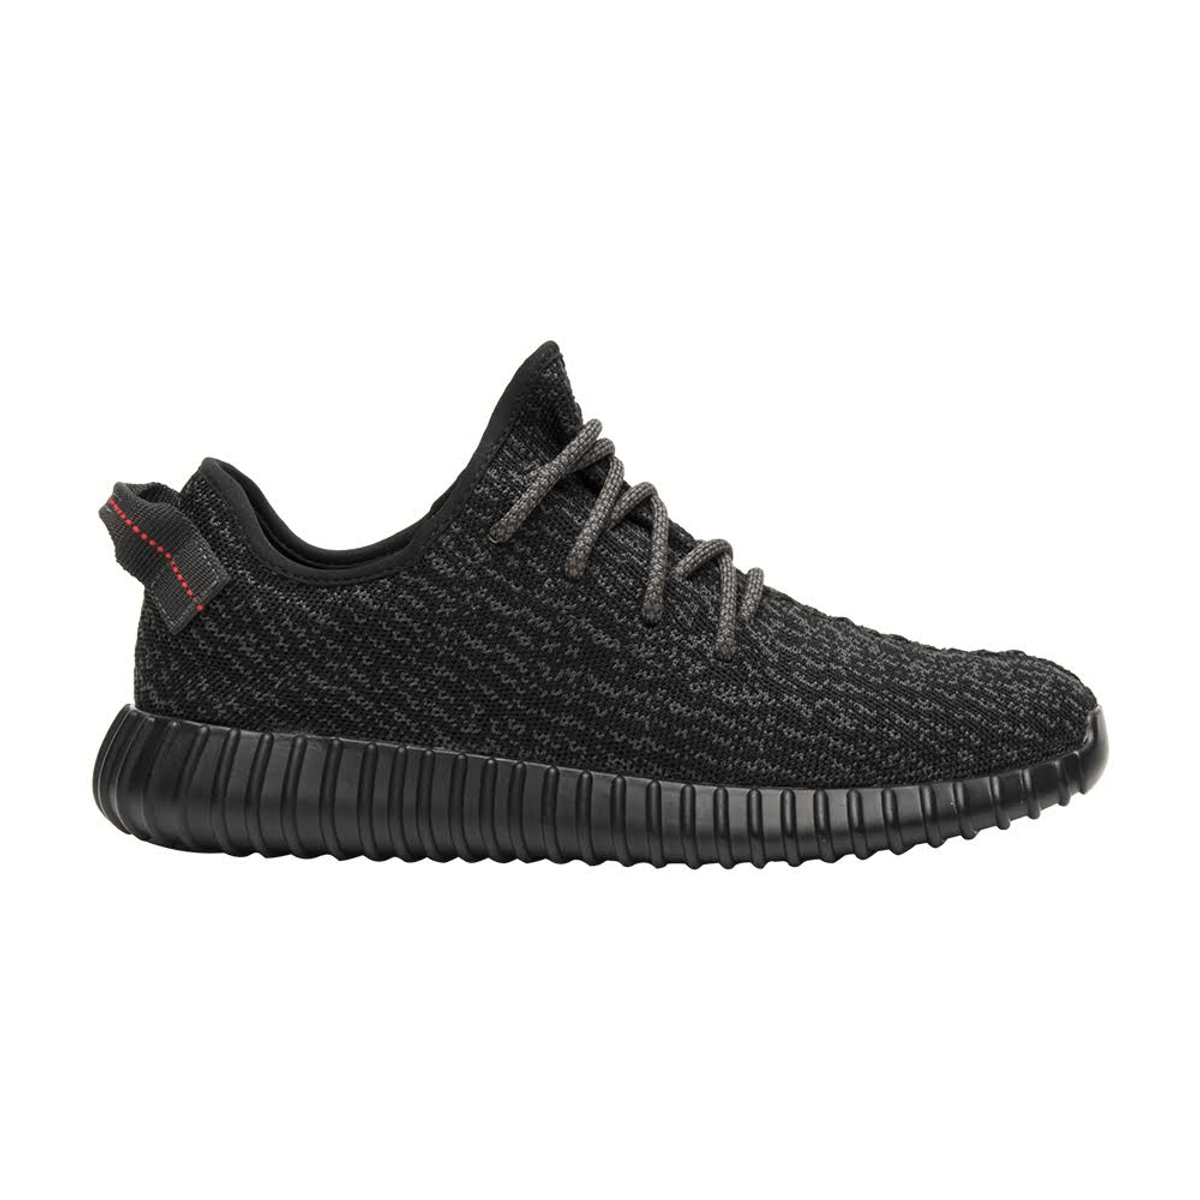 Closer Look at the 2023 Yeezy 350 Pirate Black